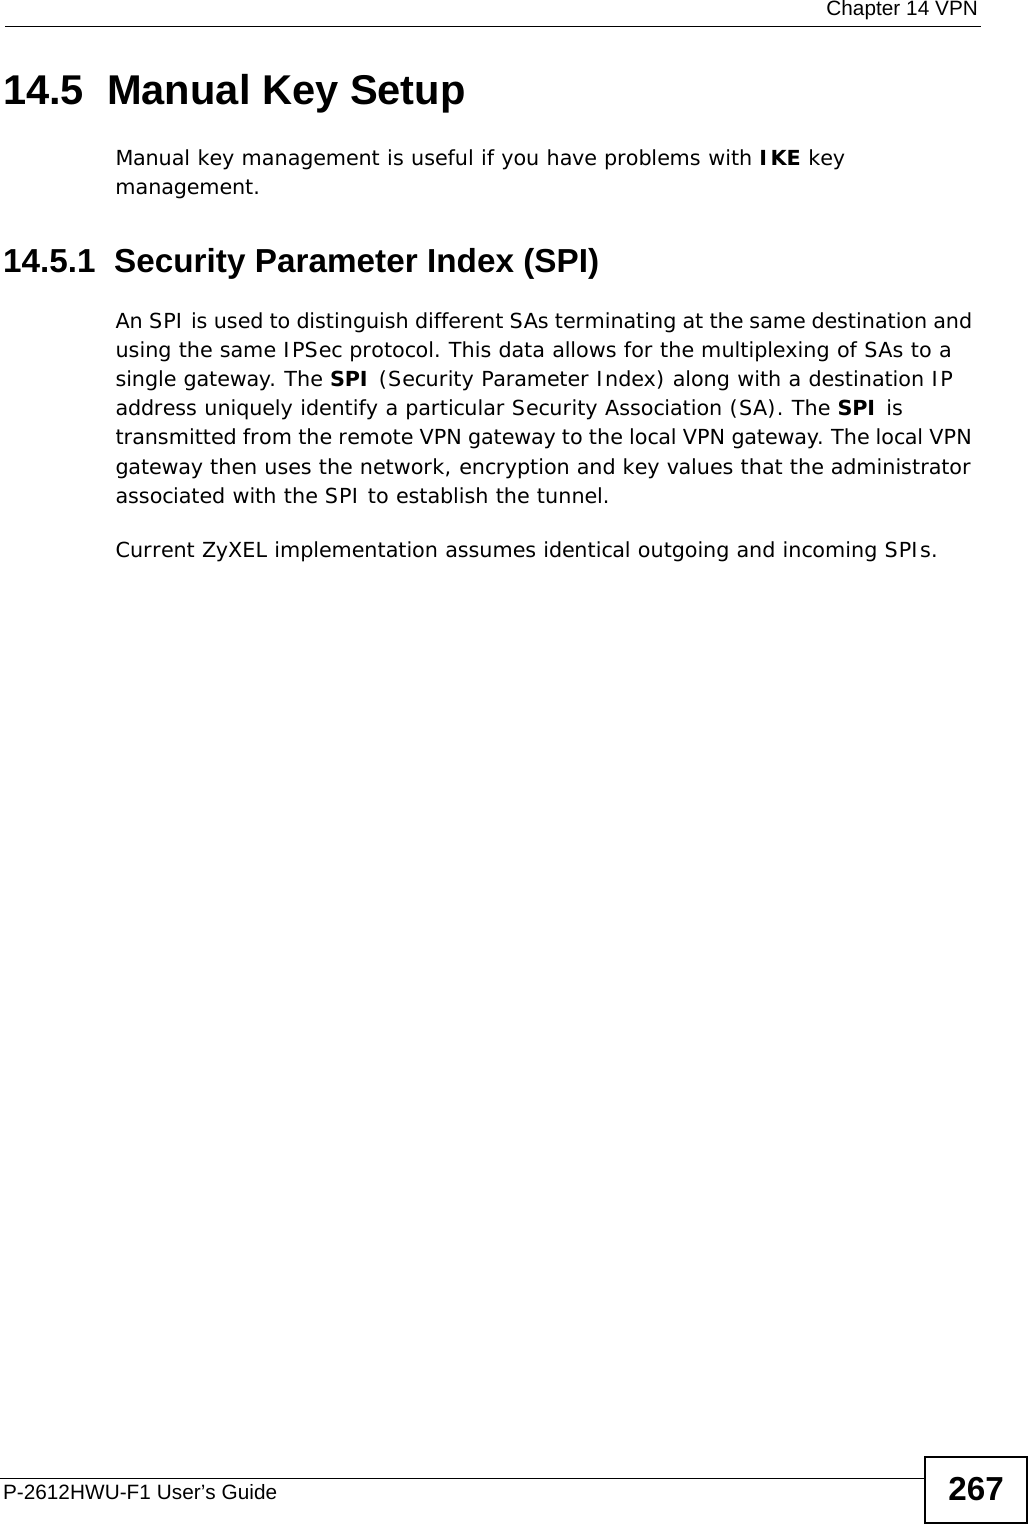  Chapter 14 VPNP-2612HWU-F1 User’s Guide 26714.5  Manual Key SetupManual key management is useful if you have problems with IKE key management.14.5.1  Security Parameter Index (SPI) An SPI is used to distinguish different SAs terminating at the same destination and using the same IPSec protocol. This data allows for the multiplexing of SAs to a single gateway. The SPI (Security Parameter Index) along with a destination IP address uniquely identify a particular Security Association (SA). The SPI is transmitted from the remote VPN gateway to the local VPN gateway. The local VPN gateway then uses the network, encryption and key values that the administrator associated with the SPI to establish the tunnel.Current ZyXEL implementation assumes identical outgoing and incoming SPIs.